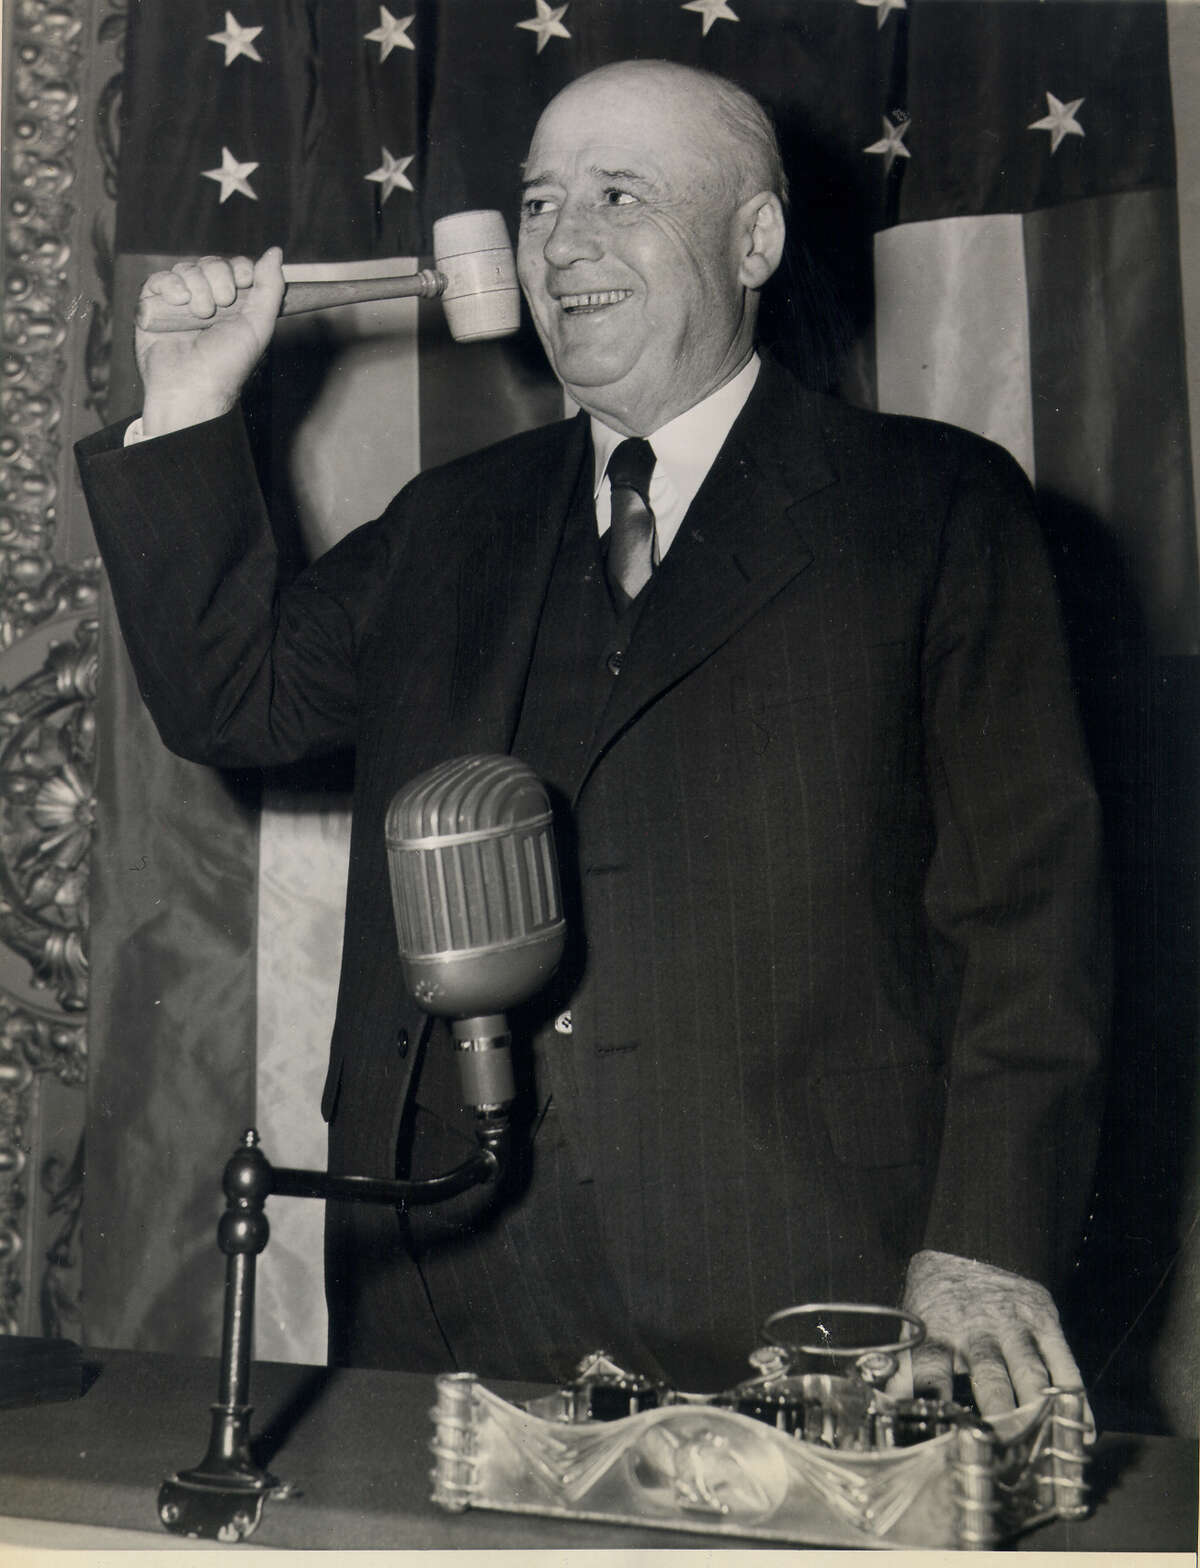 Sam Rayburn was the longest-serving Speaker of the U.S. House at 17 years. At the time of his death in 1961, he was the longest-serving congressman ever at 48 years.